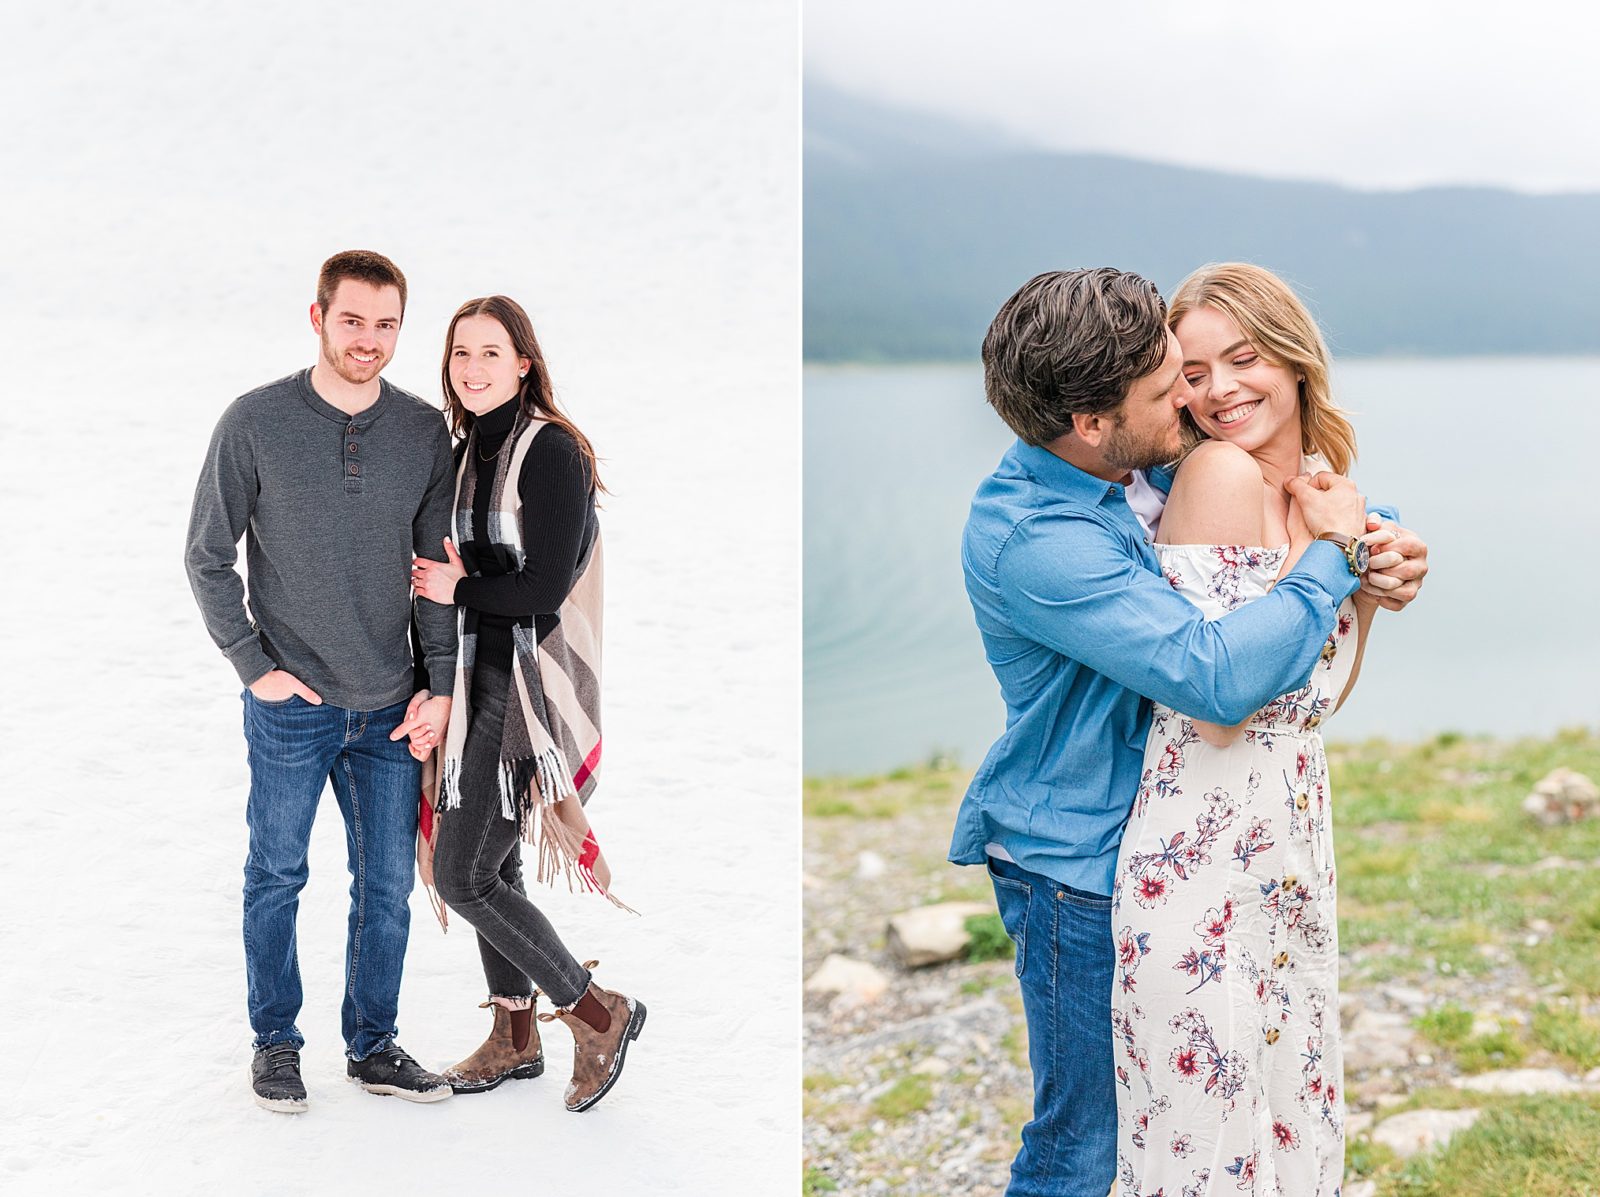 what to wear for couples photos - patterns and solid colors